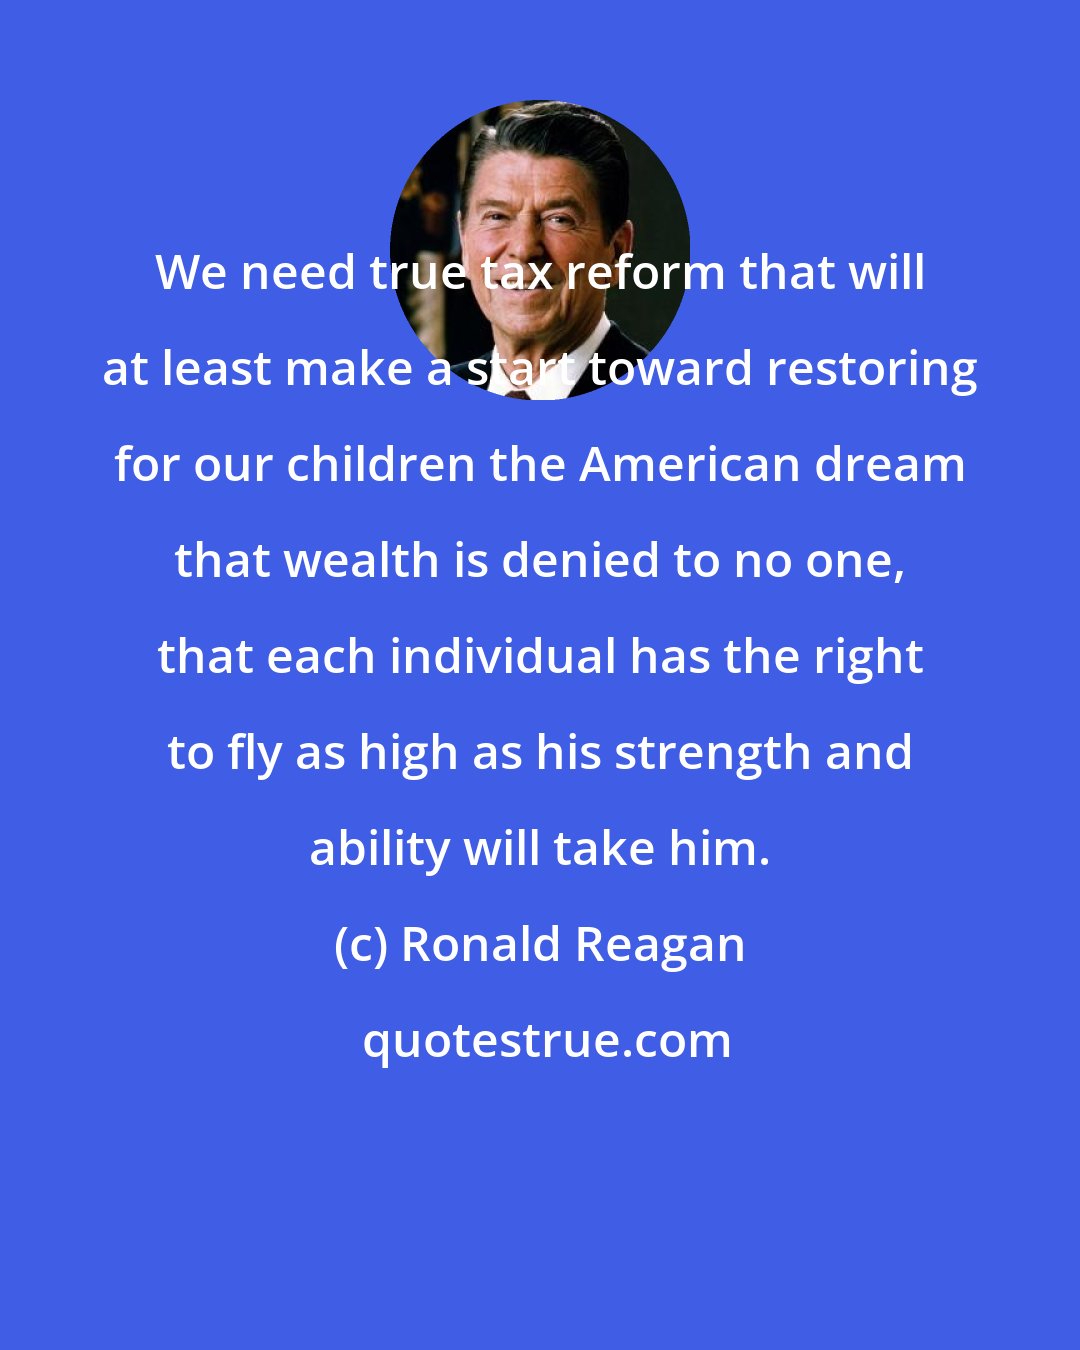 Ronald Reagan: We need true tax reform that will at least make a start toward restoring for our children the American dream that wealth is denied to no one, that each individual has the right to fly as high as his strength and ability will take him.